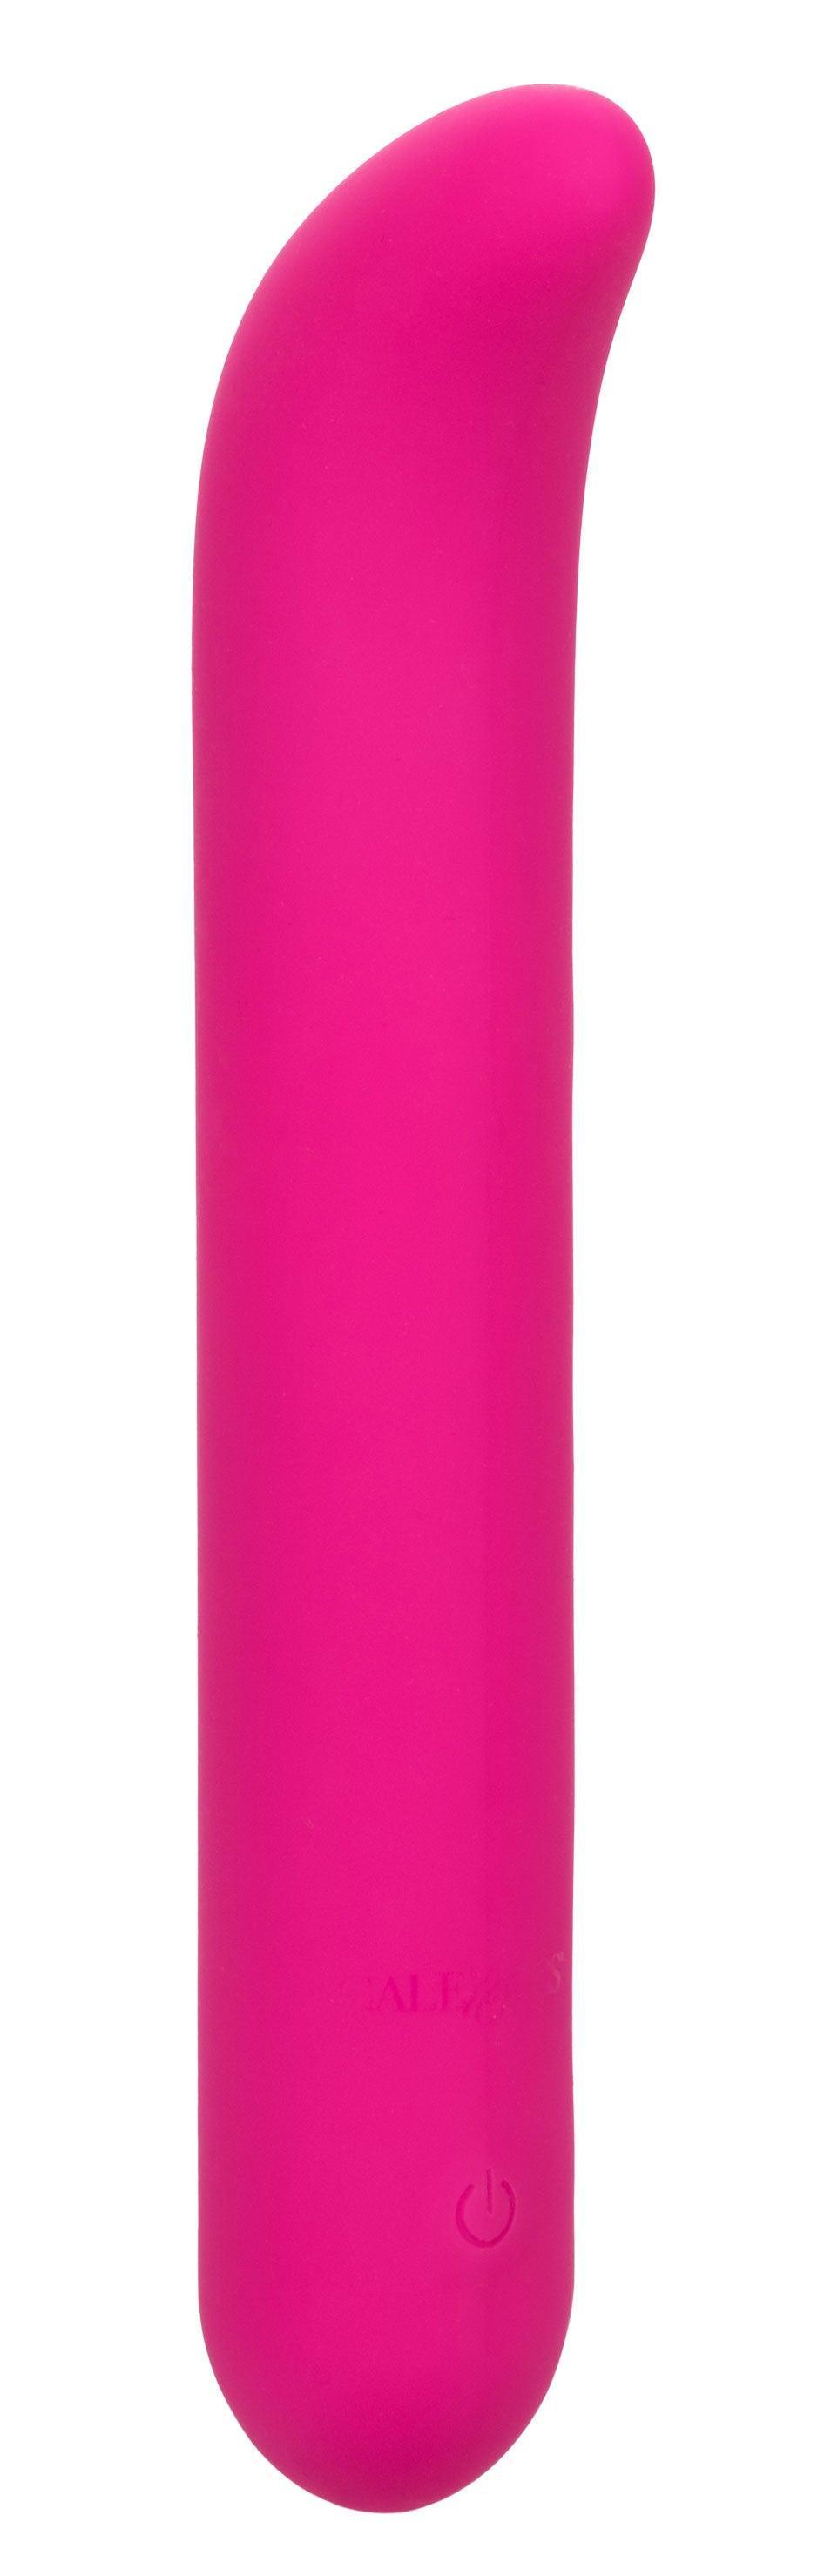 Bliss Liquid Silicone G Vibe - Pink - My Sex Toy Hub